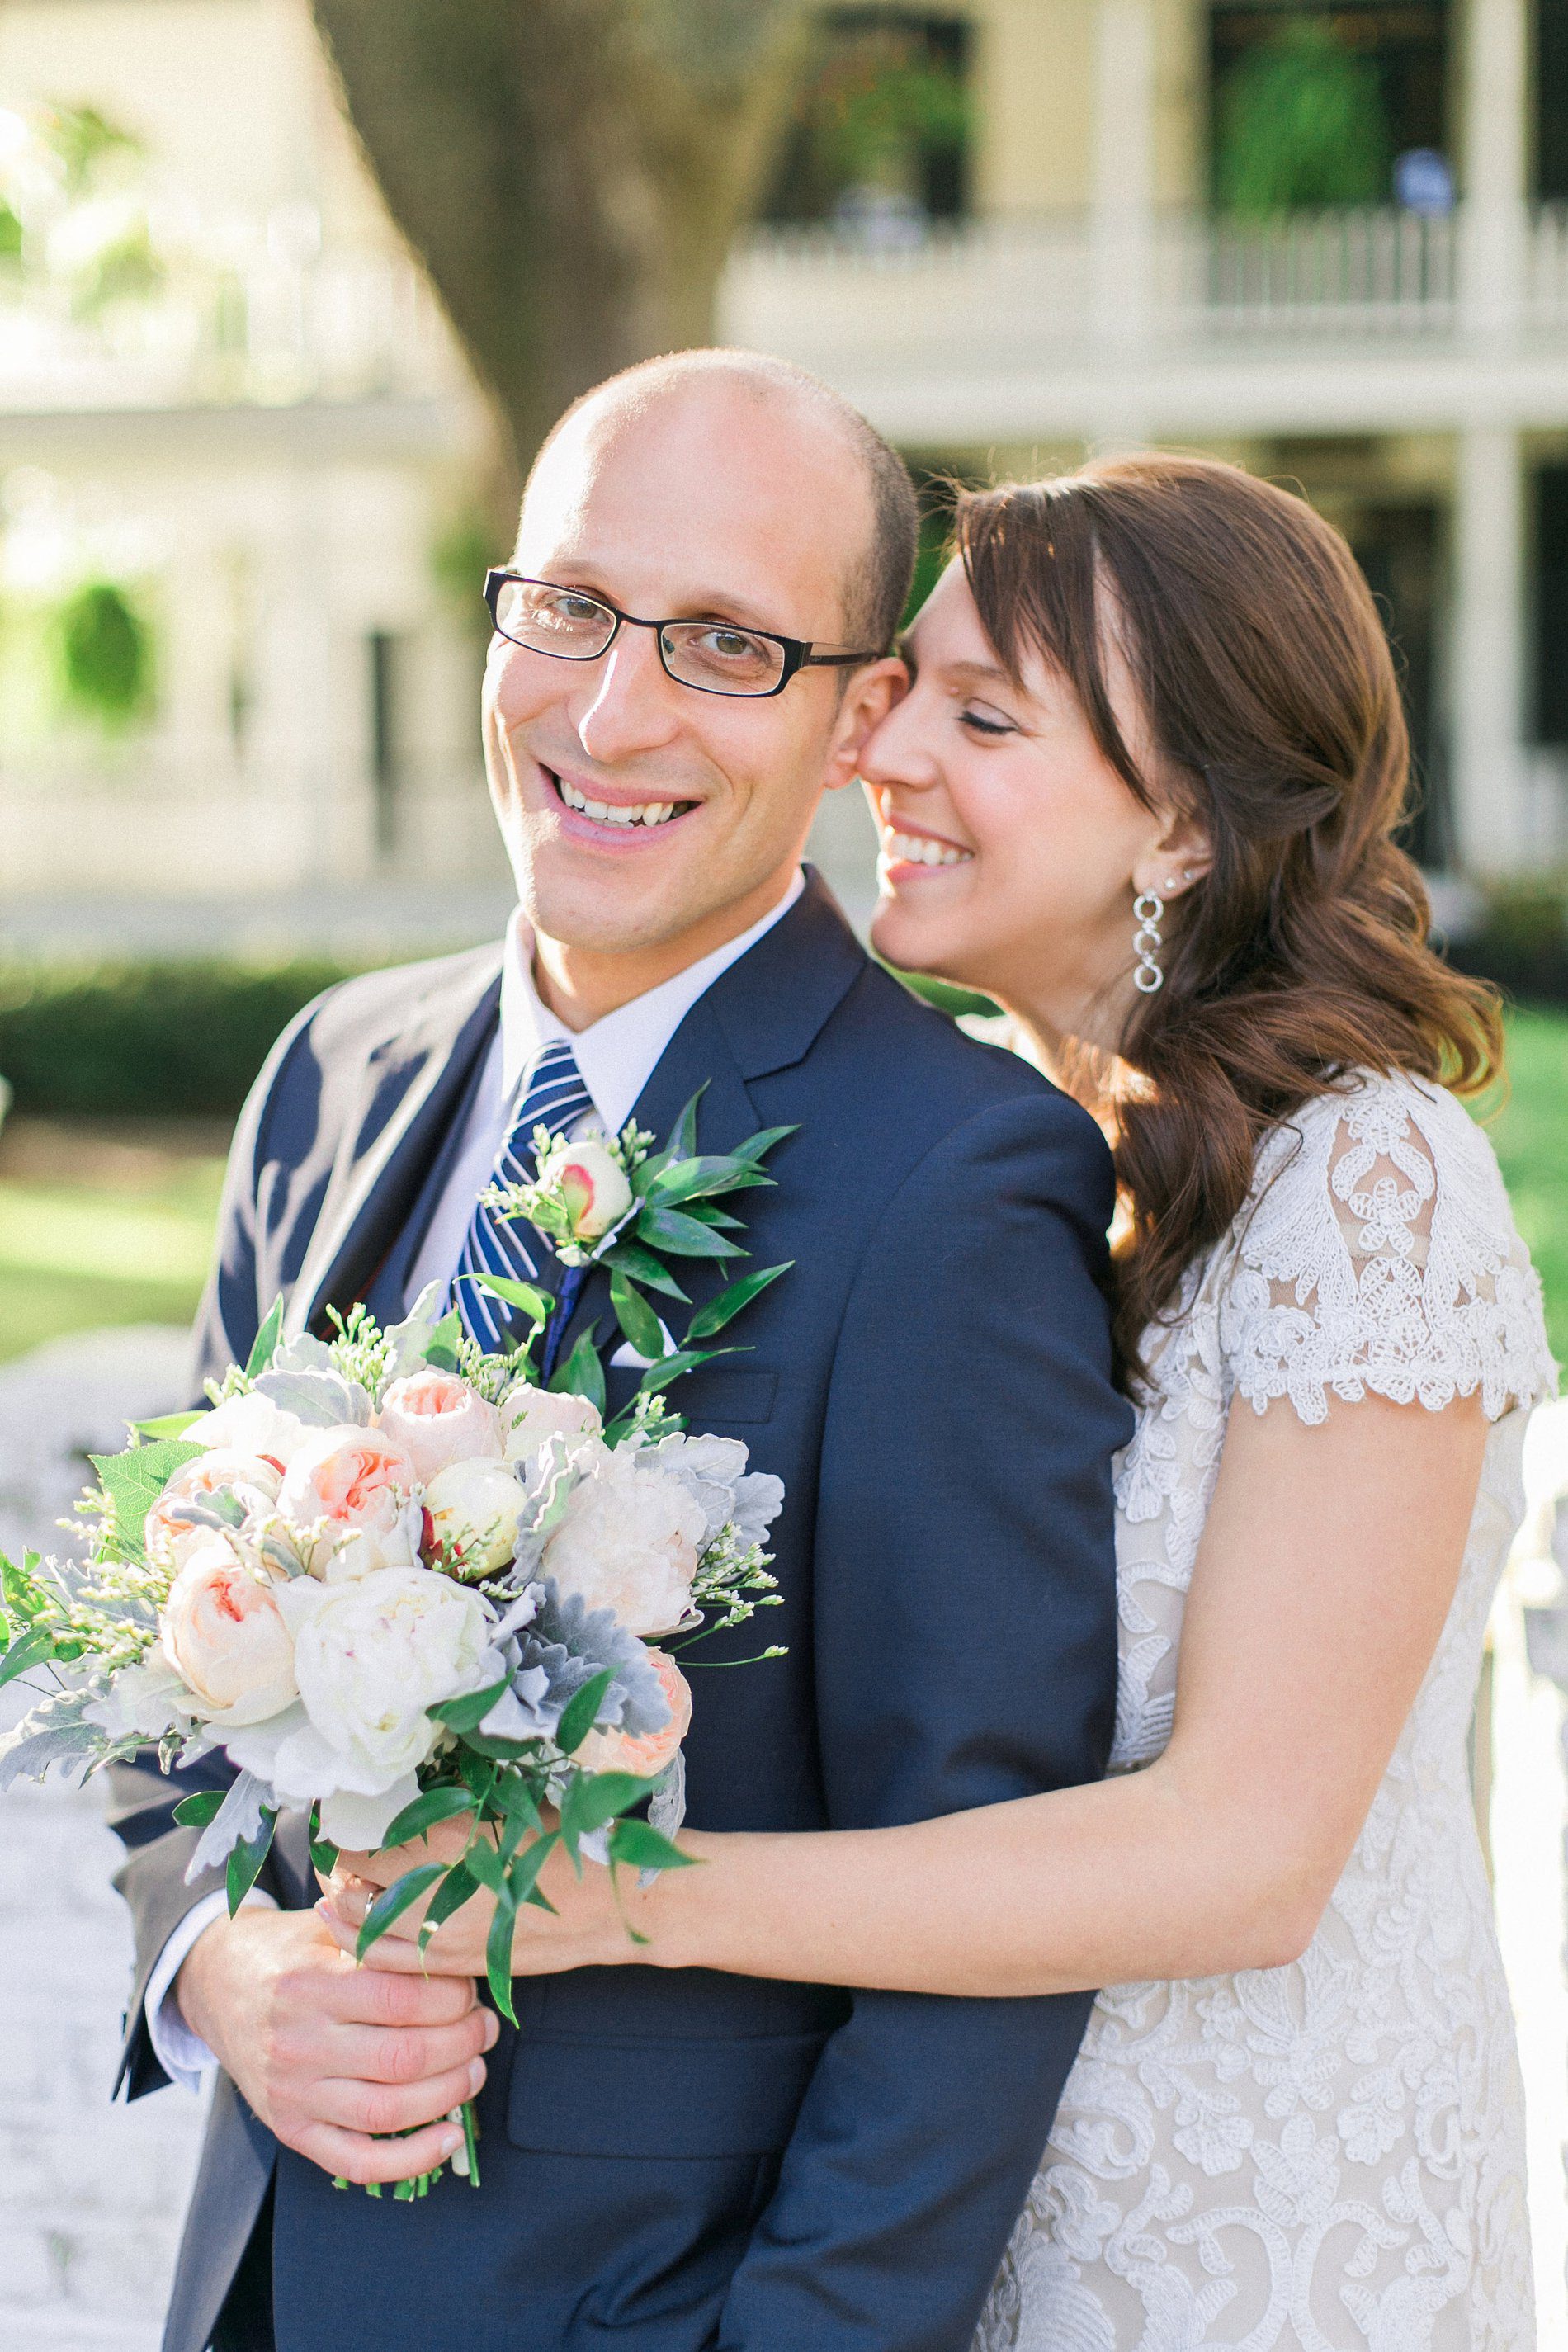 Fall elopement at the Heyward House. Bluffton SC wedding photographer Catherine Ann Photography